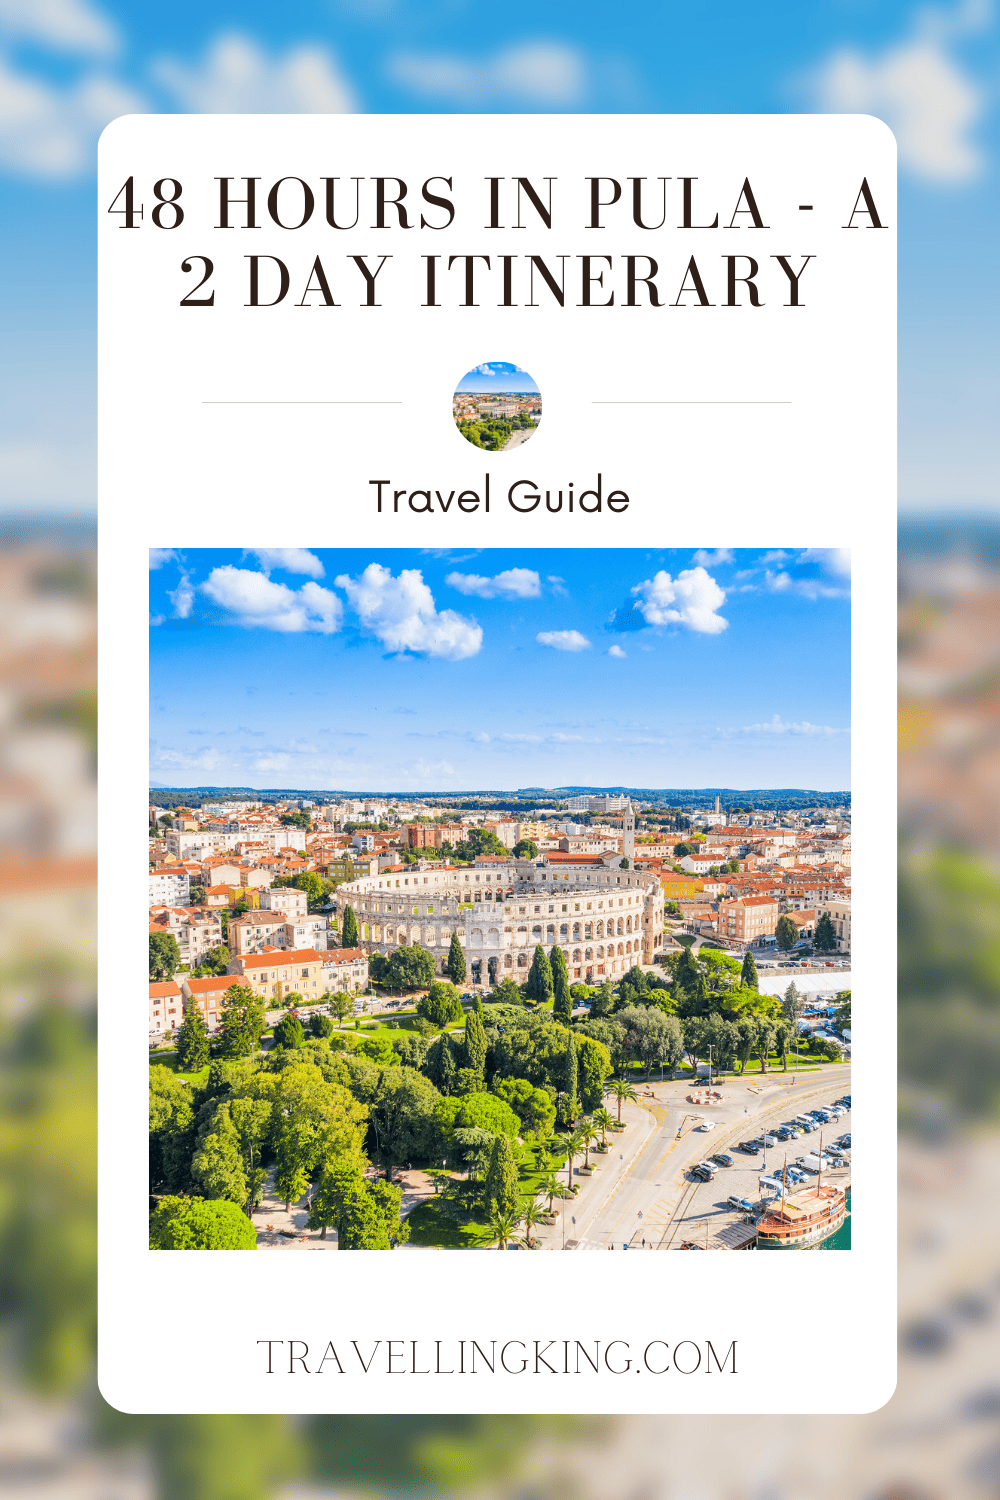 48 hours in Pula - A 2 day Itinerary